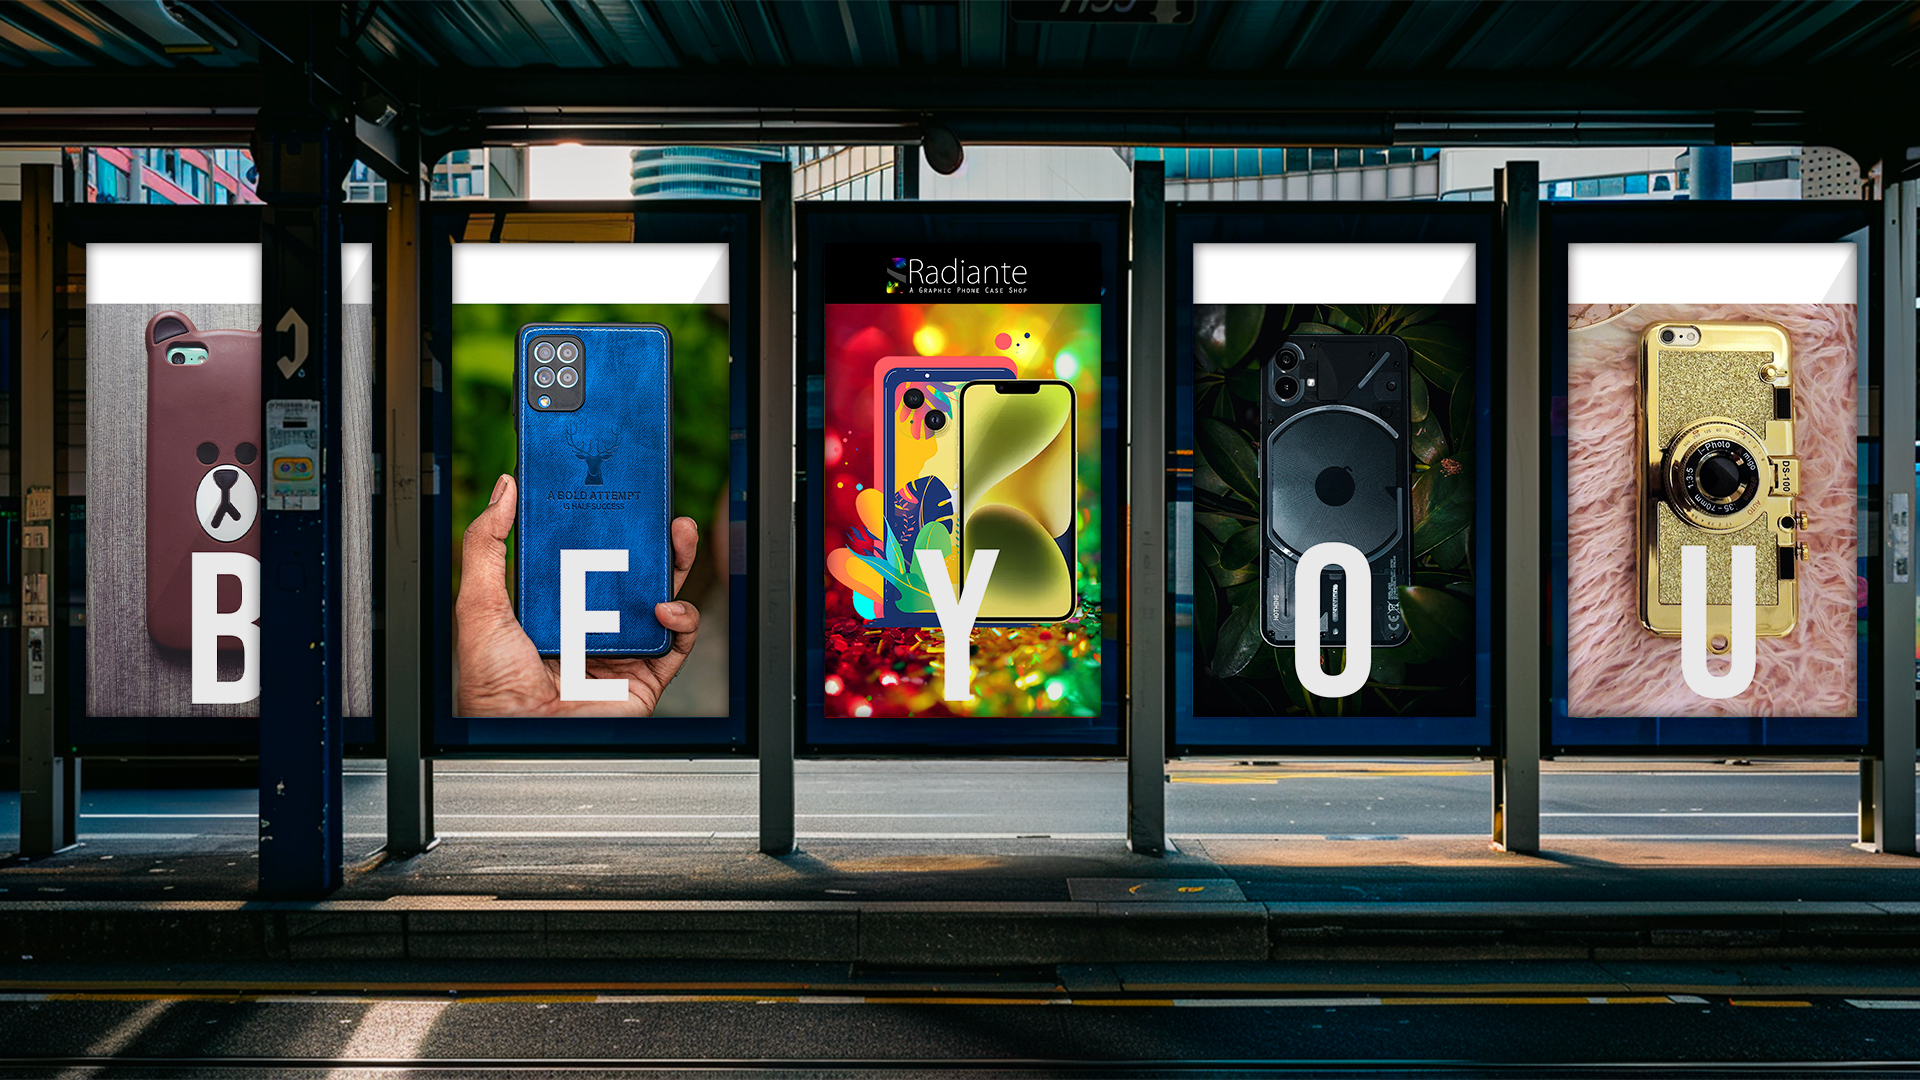 Five large Radiante branded posters with a unique case in sequence in city, B, E, Y, O, U.